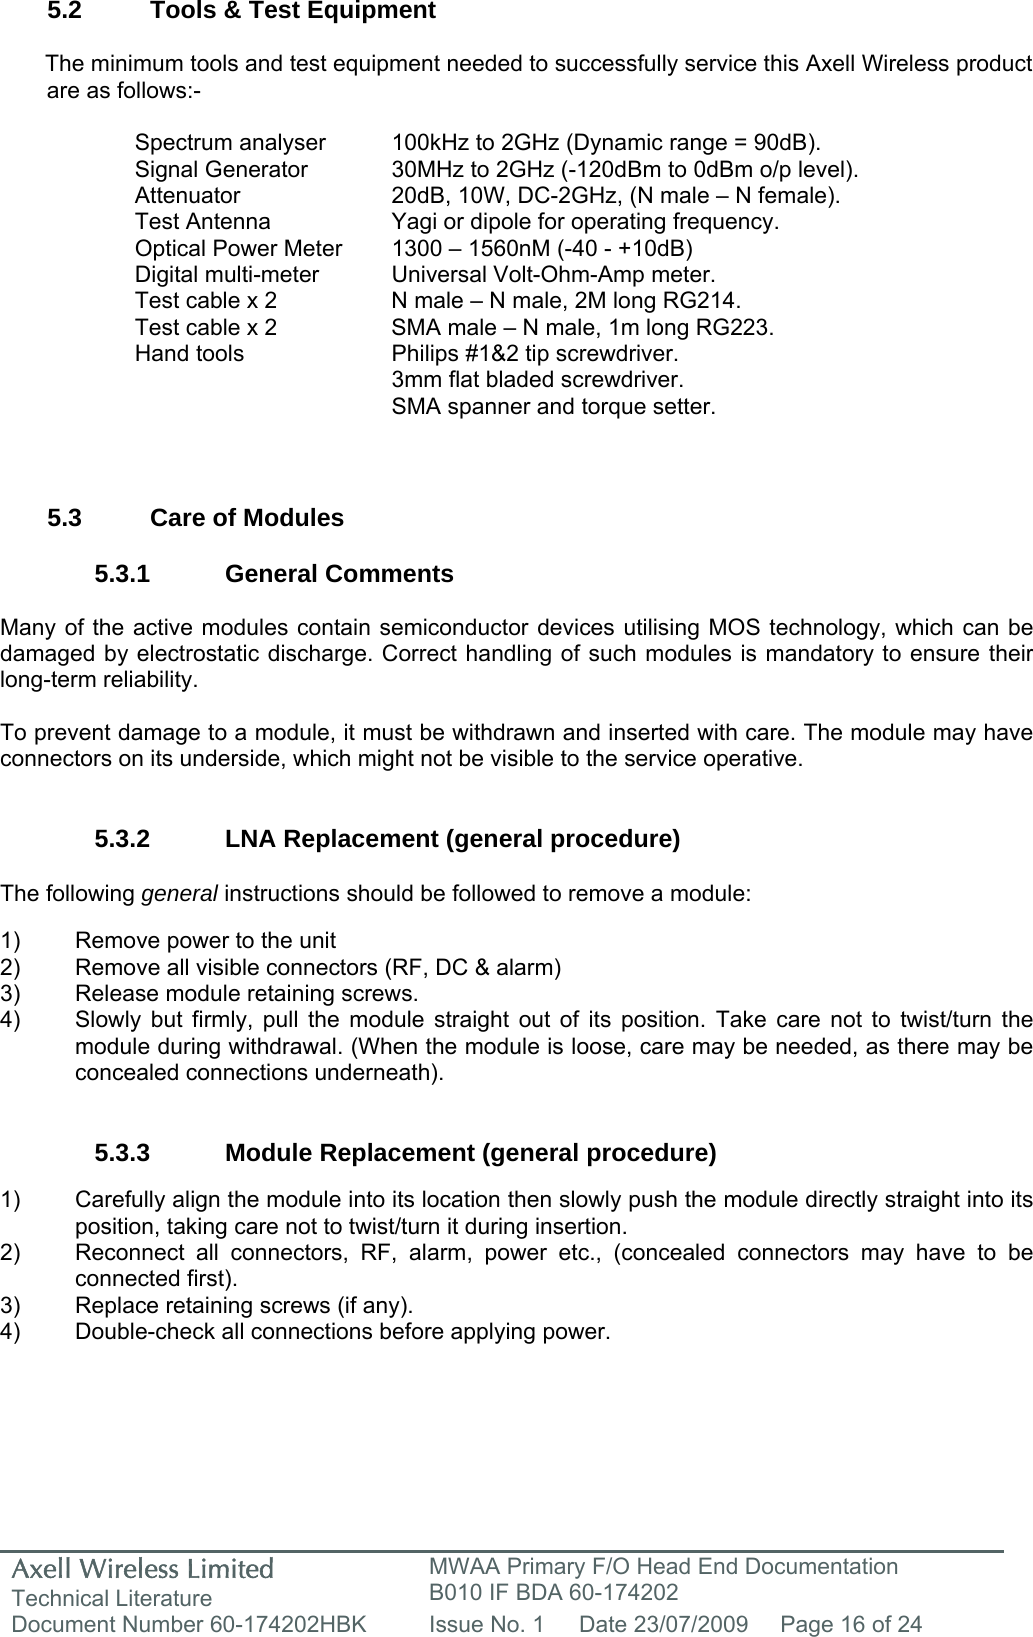 Axell Wireless Limited Technical Literature MWAA Primary F/O Head End Documentation B010 IF BDA 60-174202 Document Number 60-174202HBK  Issue No. 1  Date 23/07/2009  Page 16 of 24   5.2  Tools &amp; Test Equipment  The minimum tools and test equipment needed to successfully service this Axell Wireless product are as follows:-  Spectrum analyser  100kHz to 2GHz (Dynamic range = 90dB). Signal Generator  30MHz to 2GHz (-120dBm to 0dBm o/p level). Attenuator  20dB, 10W, DC-2GHz, (N male – N female). Test Antenna  Yagi or dipole for operating frequency. Optical Power Meter  1300 – 1560nM (-40 - +10dB) Digital multi-meter  Universal Volt-Ohm-Amp meter. Test cable x 2  N male – N male, 2M long RG214. Test cable x 2  SMA male – N male, 1m long RG223. Hand tools  Philips #1&amp;2 tip screwdriver. 3mm flat bladed screwdriver. SMA spanner and torque setter.   5.3  Care of Modules  5.3.1 General Comments  Many of the active modules contain semiconductor devices utilising MOS technology, which can be damaged by electrostatic discharge. Correct handling of such modules is mandatory to ensure their long-term reliability.  To prevent damage to a module, it must be withdrawn and inserted with care. The module may have connectors on its underside, which might not be visible to the service operative.   5.3.2  LNA Replacement (general procedure)  The following general instructions should be followed to remove a module:  1)  Remove power to the unit 2)  Remove all visible connectors (RF, DC &amp; alarm) 3)  Release module retaining screws. 4)  Slowly but firmly, pull the module straight out of its position. Take care not to twist/turn the   module during withdrawal. (When the module is loose, care may be needed, as there may be   concealed connections underneath).   5.3.3 Module Replacement (general procedure)  1)  Carefully align the module into its location then slowly push the module directly straight into its position, taking care not to twist/turn it during insertion. 2)  Reconnect all connectors, RF, alarm, power etc., (concealed connectors may have to be connected first). 3)  Replace retaining screws (if any). 4)  Double-check all connections before applying power. 